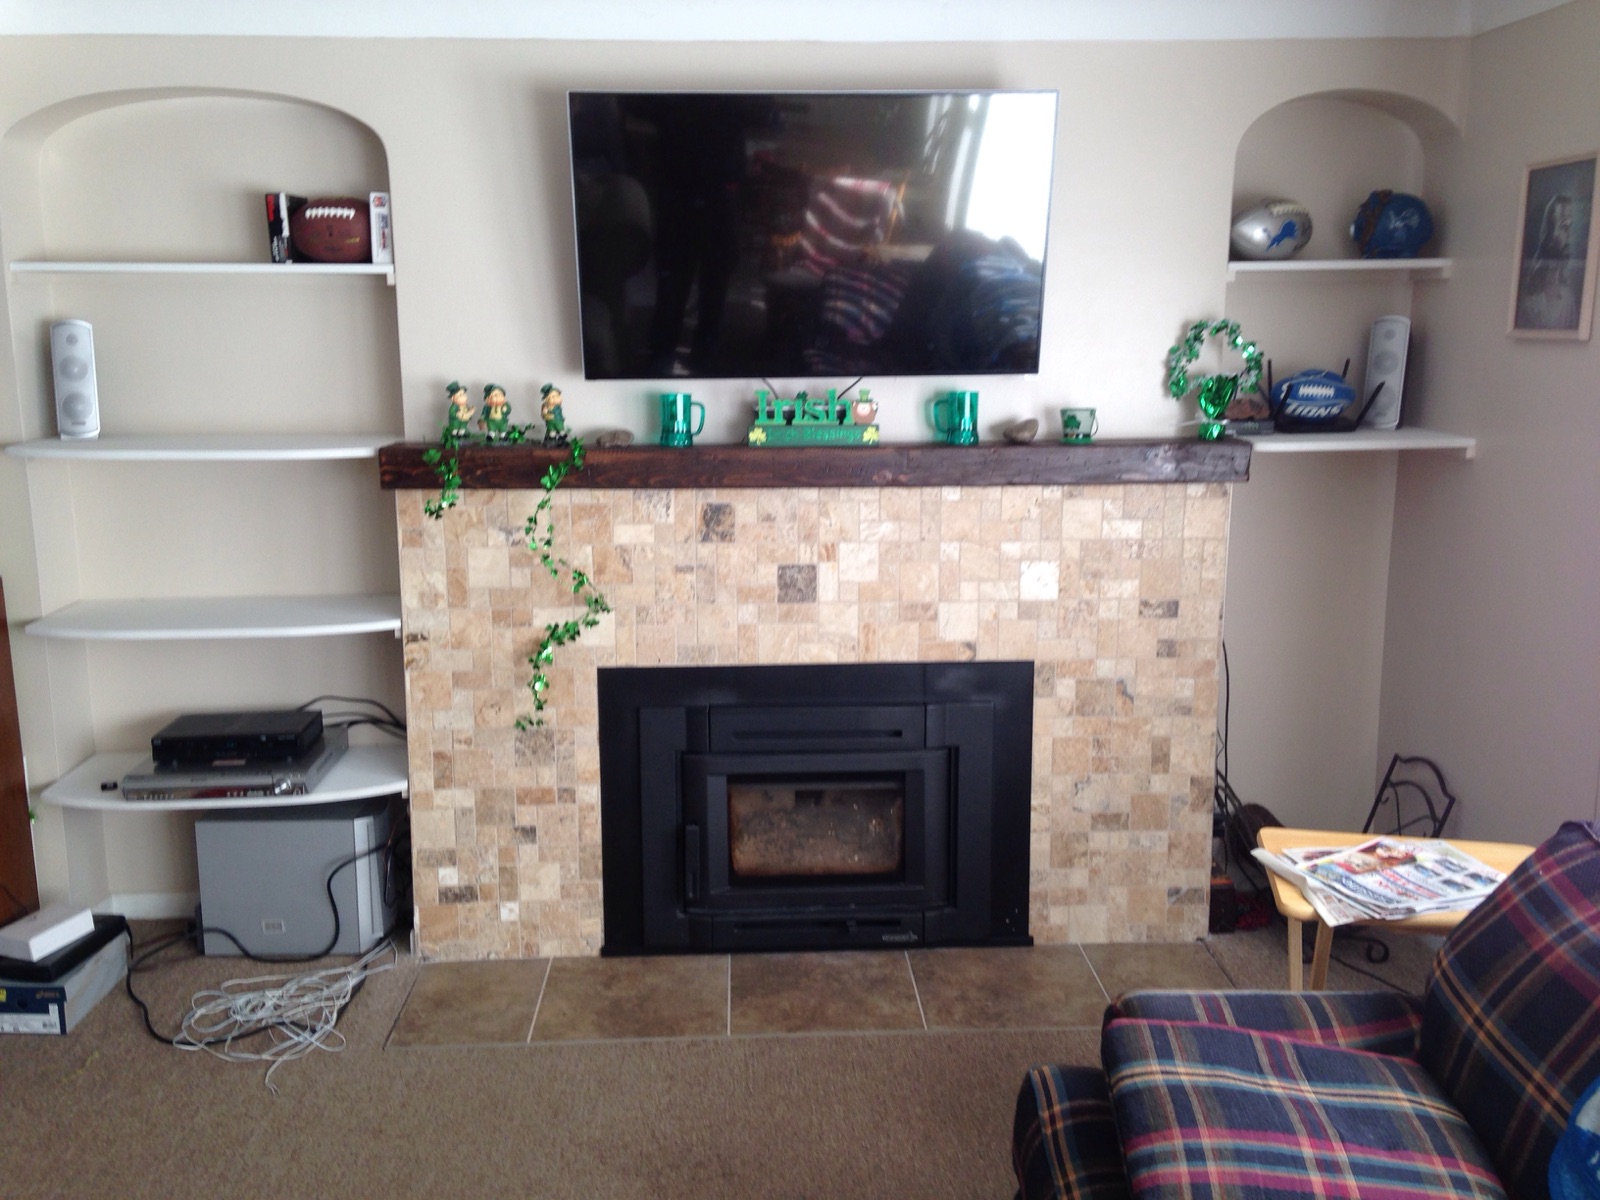 gas fireplace with light stone surround and wooden mantel